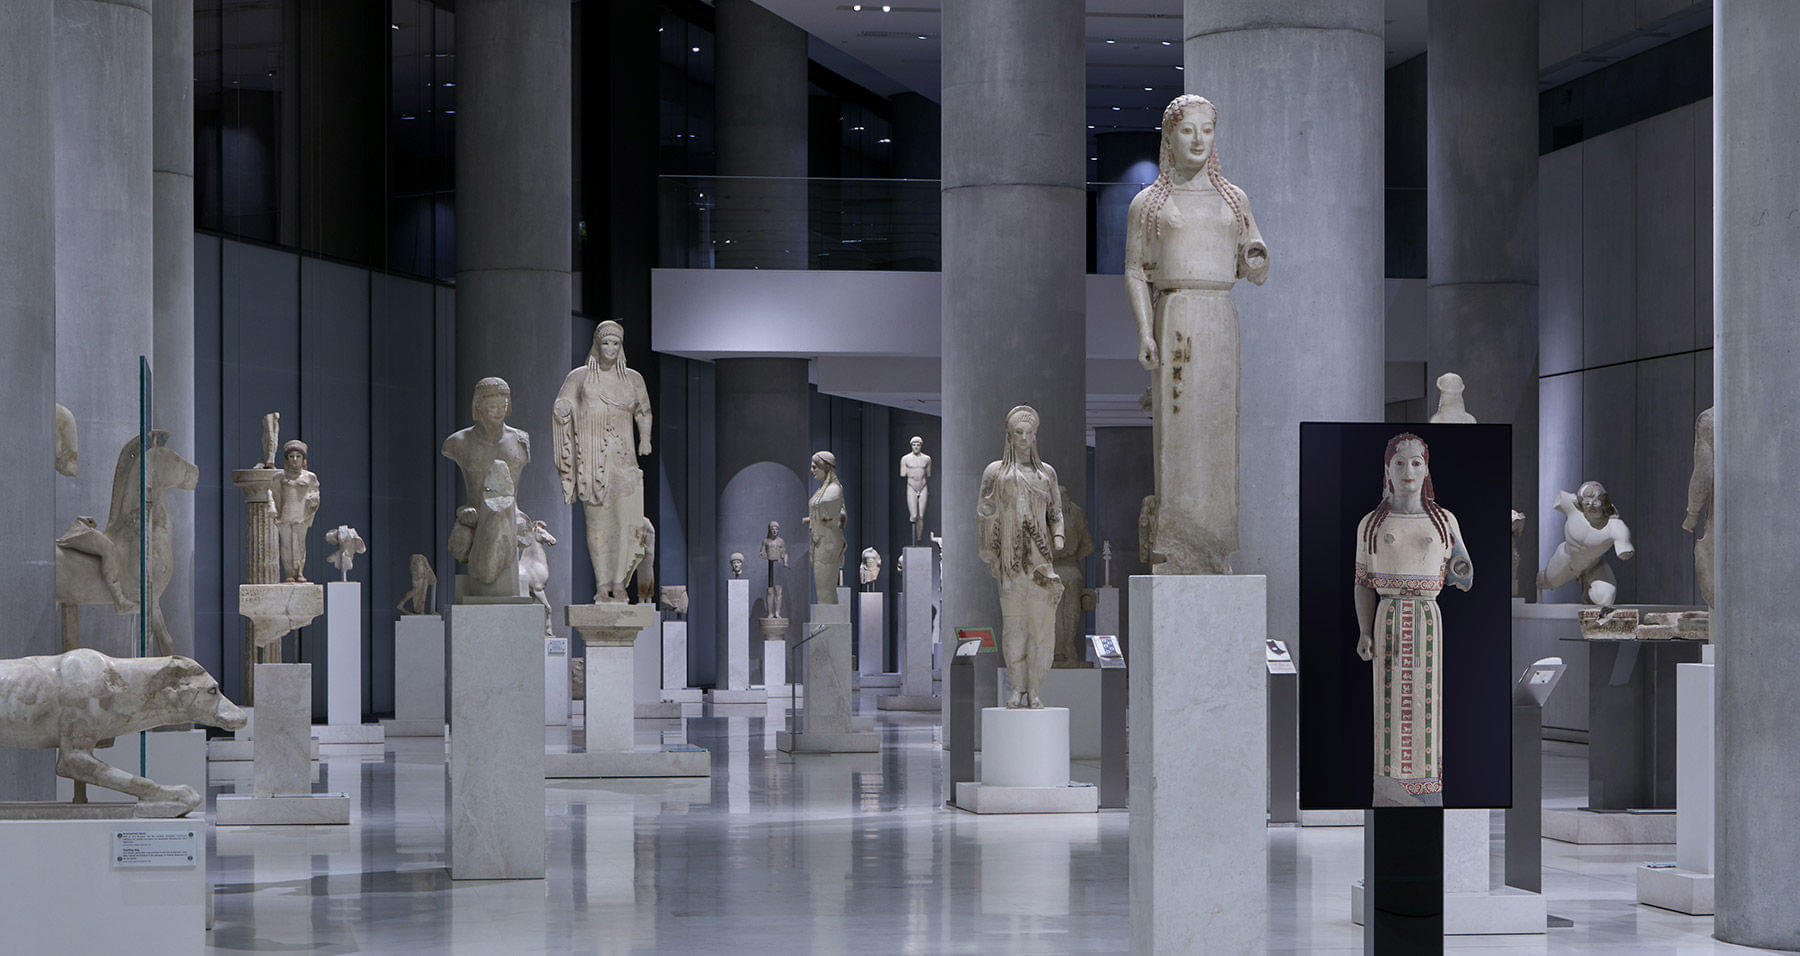 See an amazing collection of ancient artworks at the museum